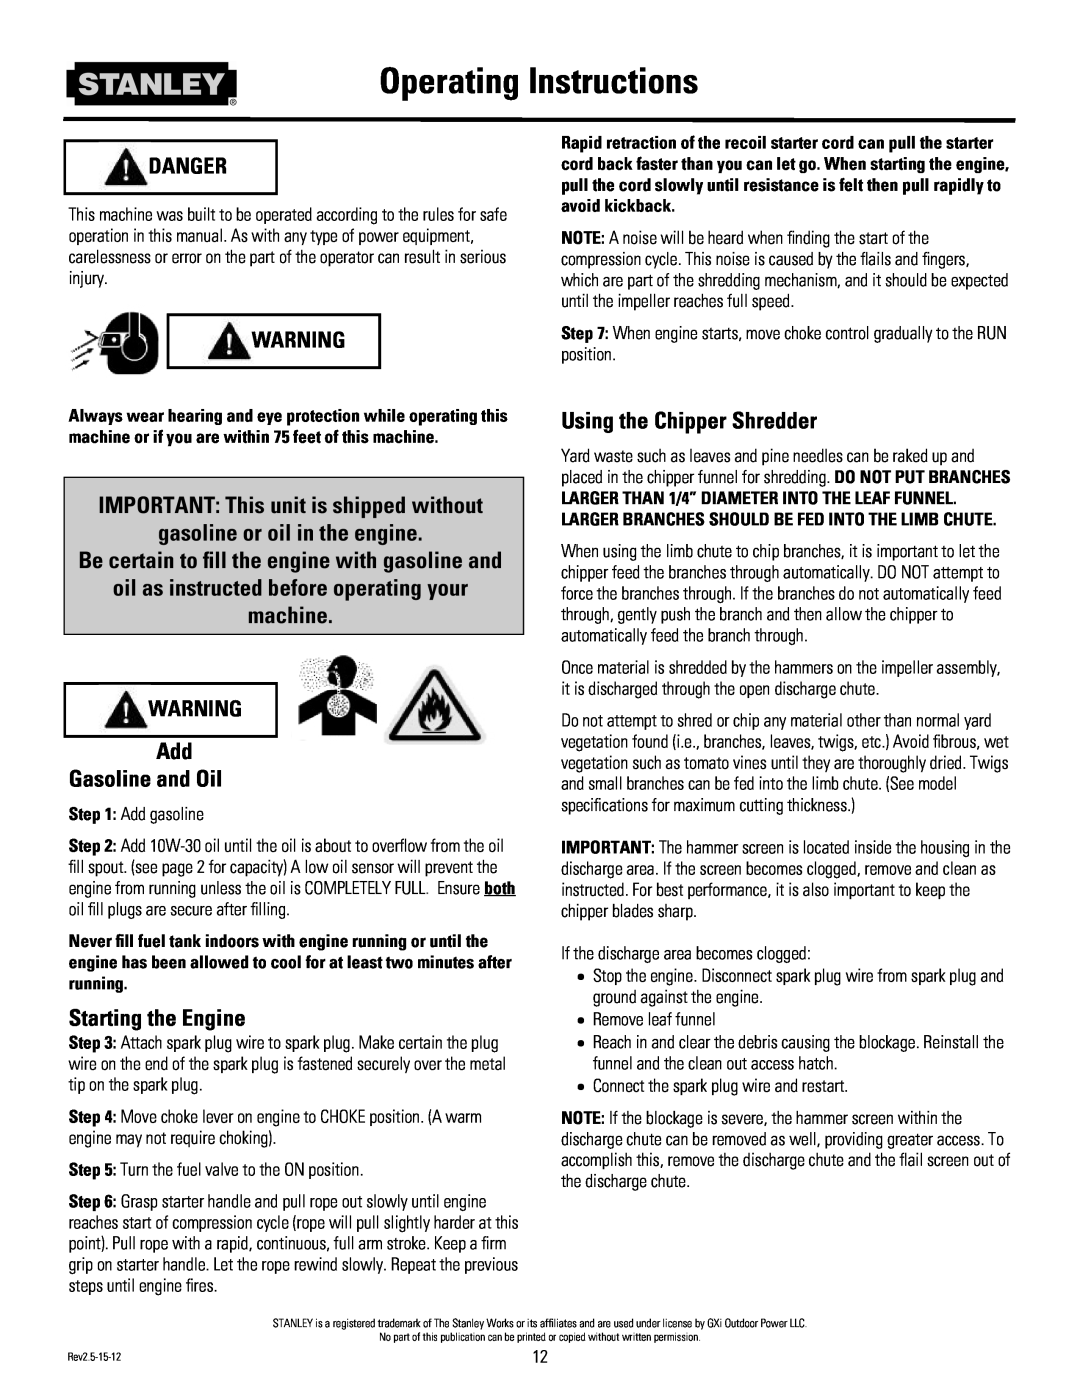 Stanley Black & Decker CH2 Operating Instructions, IMPORTANT: This unit is shipped without, gasoline or oil in the engine 